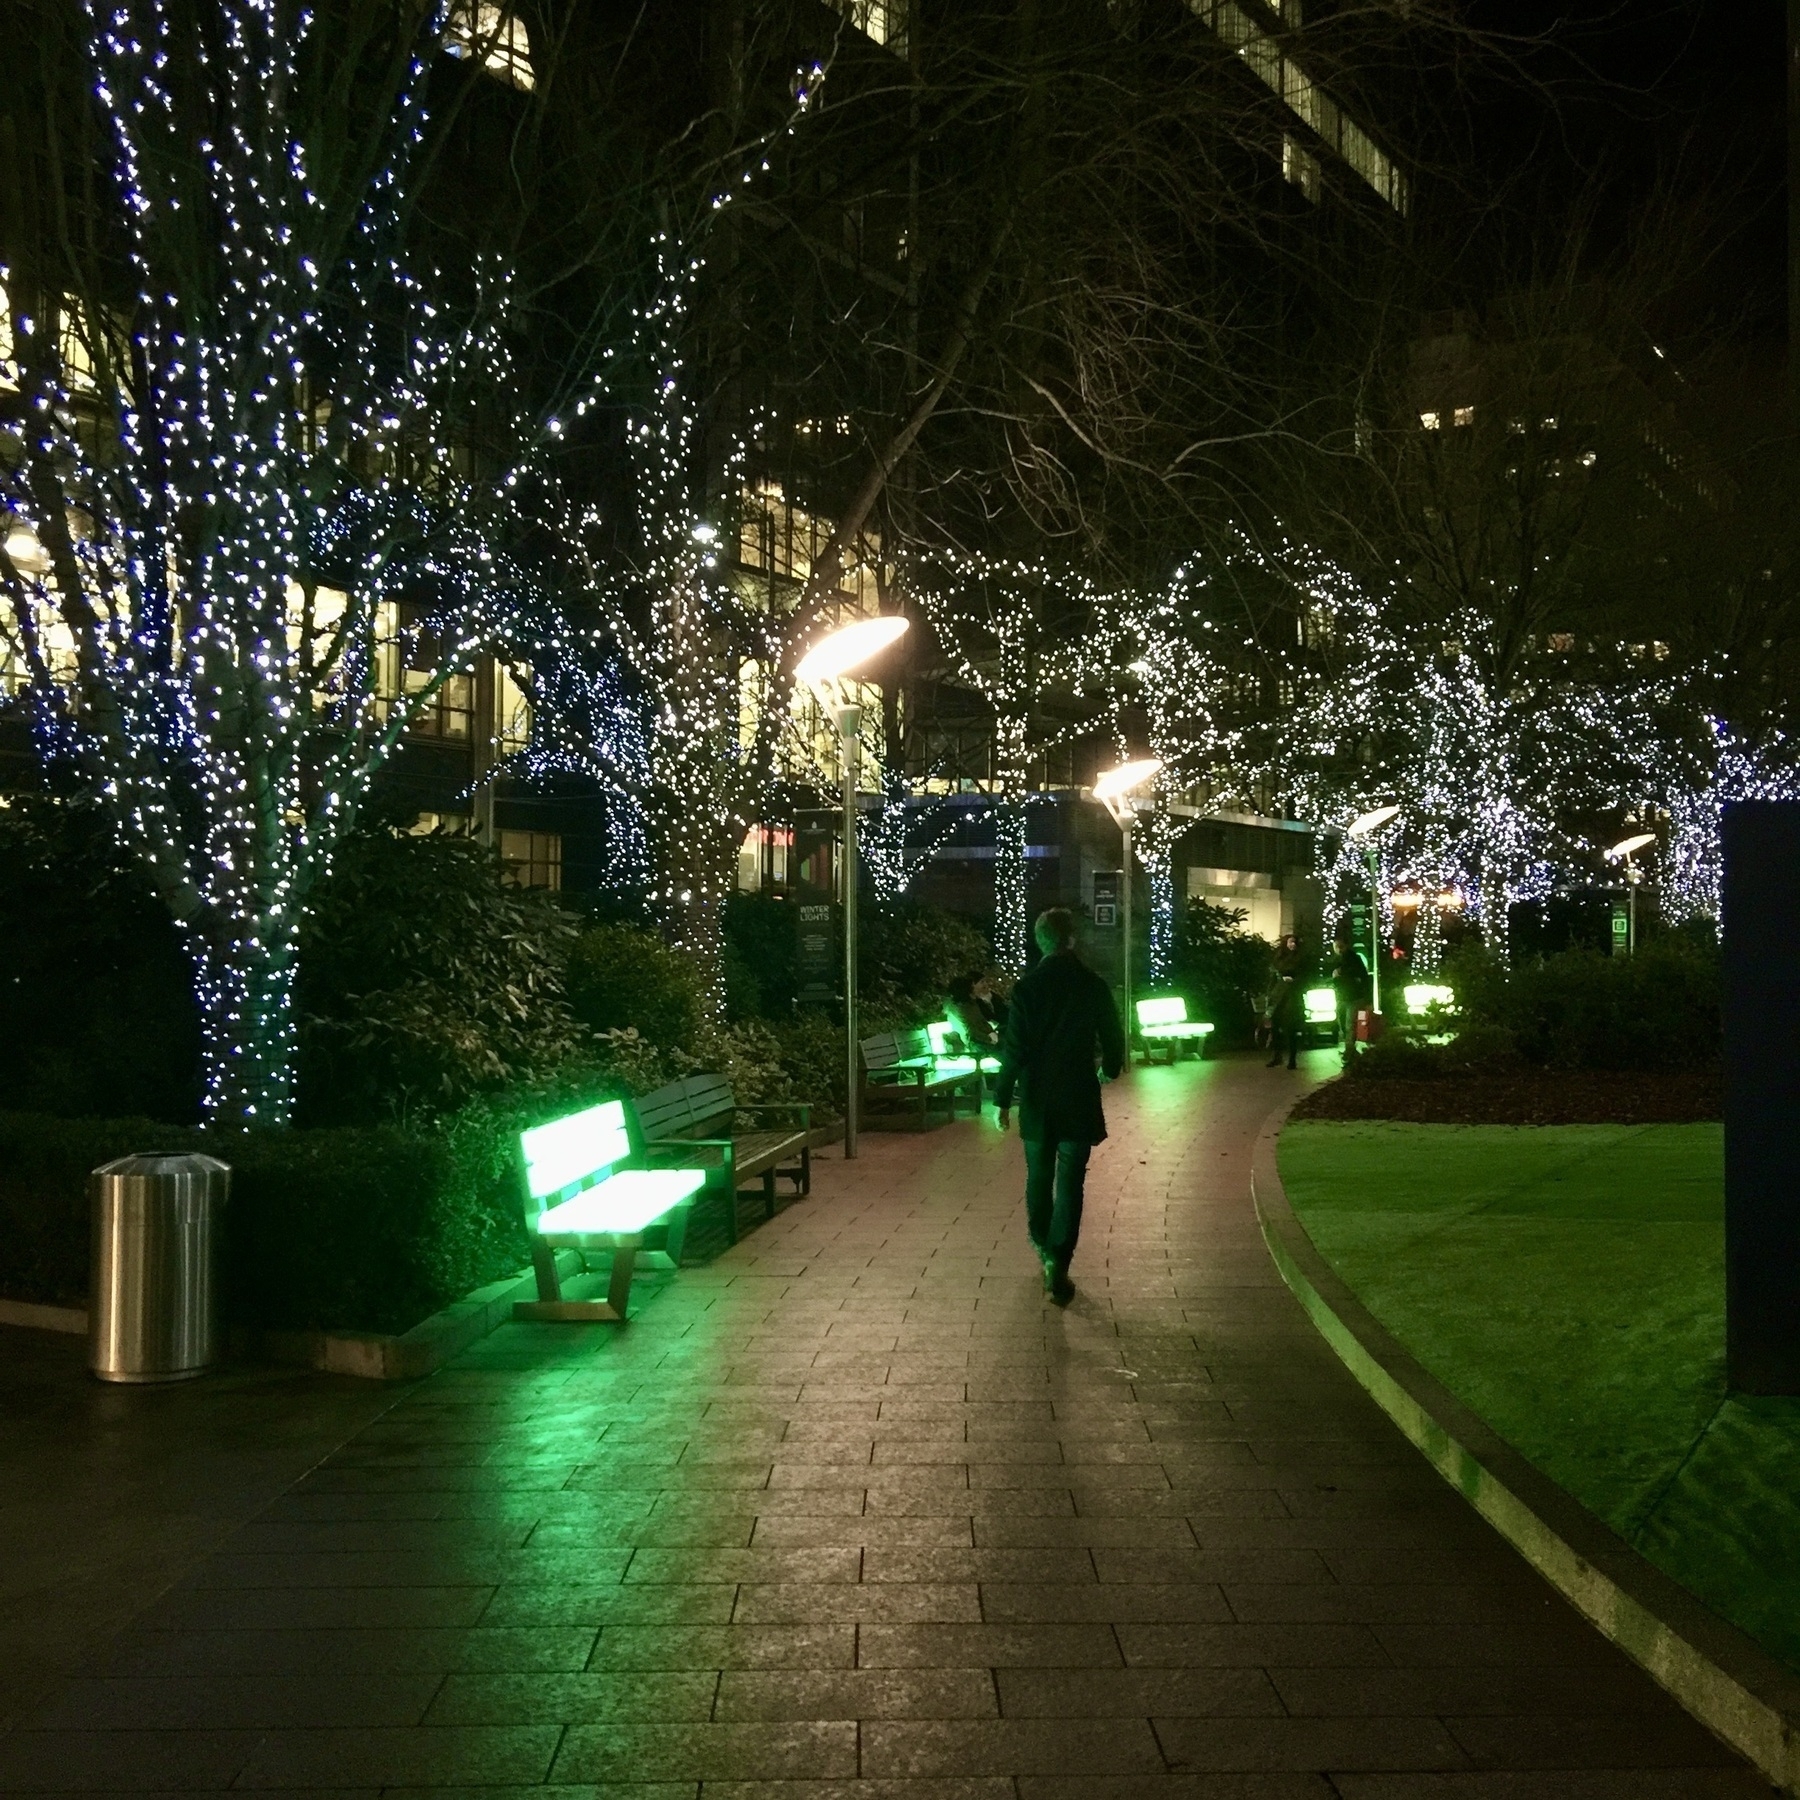 A smartly dressed man walks down the path in a park. The trees are lit with fairylights, the park benches glow green.